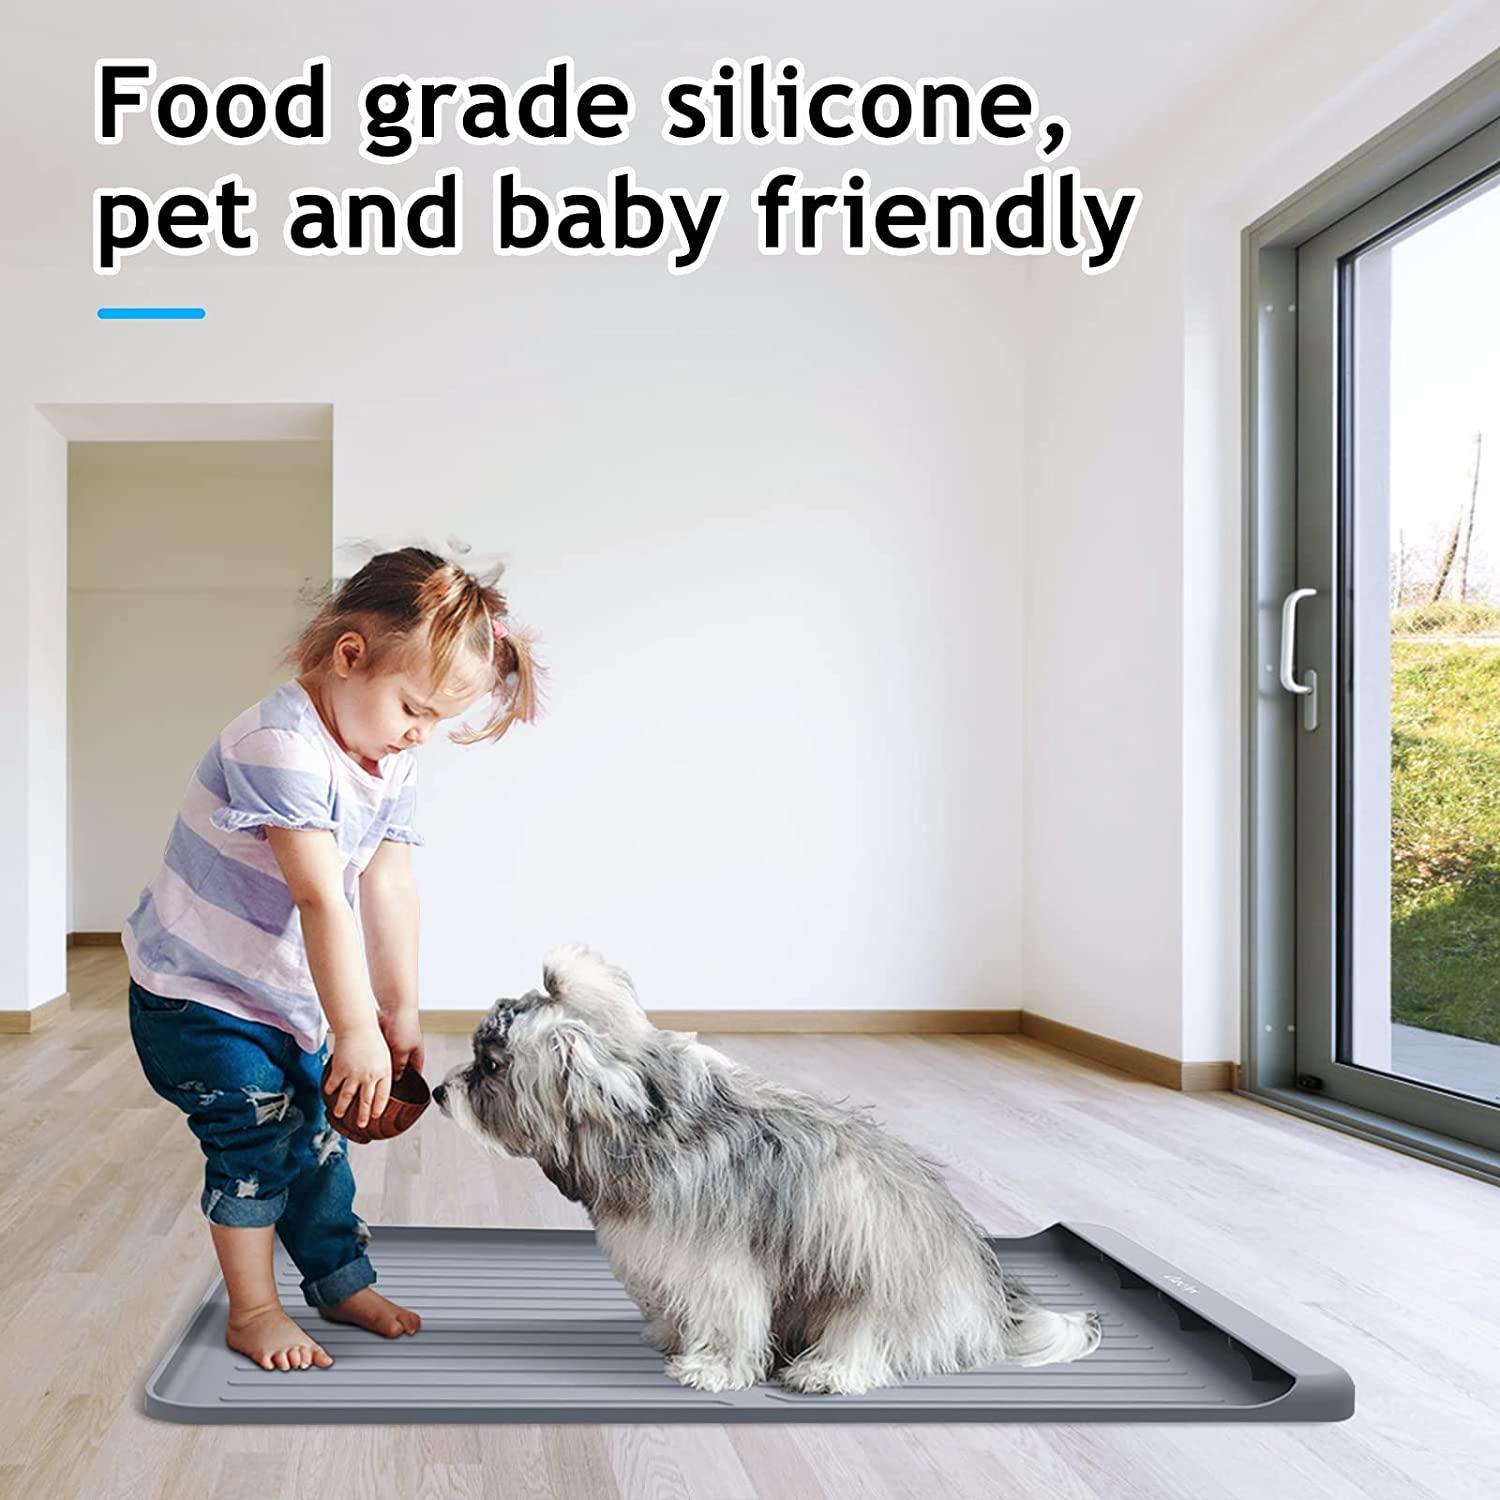 Dog Feeding Mats for Food and Water - 36 x 24 Extra Large - Silicone Non  Slip